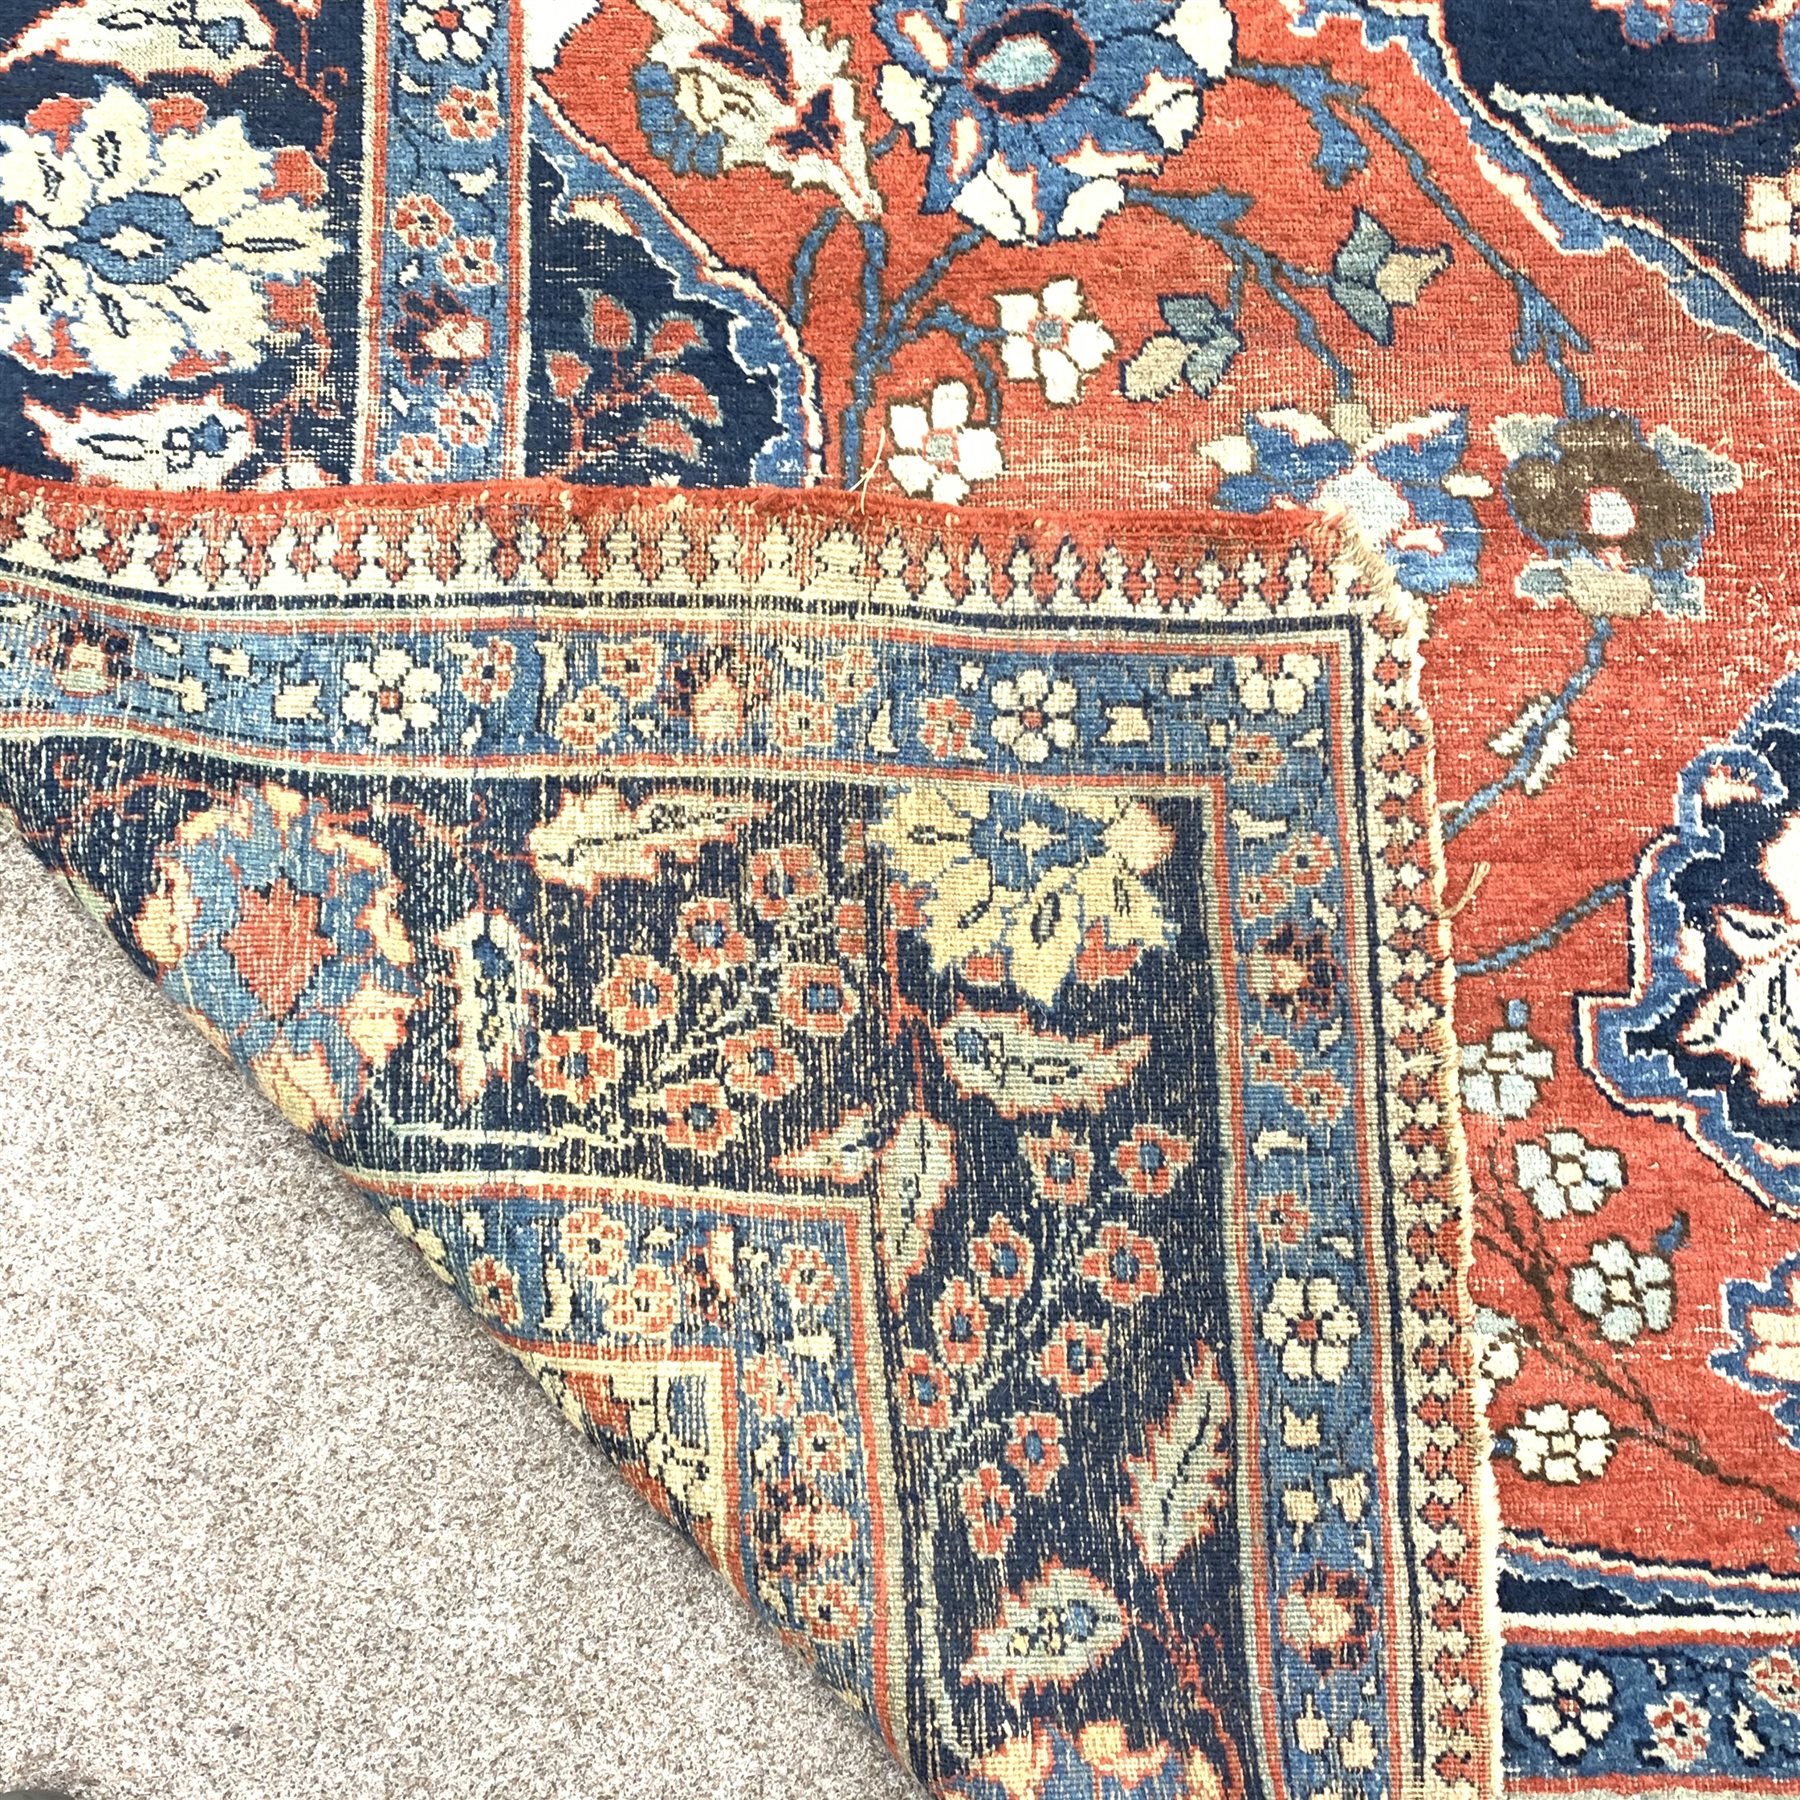 Antique Persian blue and red ground rug carpet, 250cm x 352 cm - Image 3 of 3